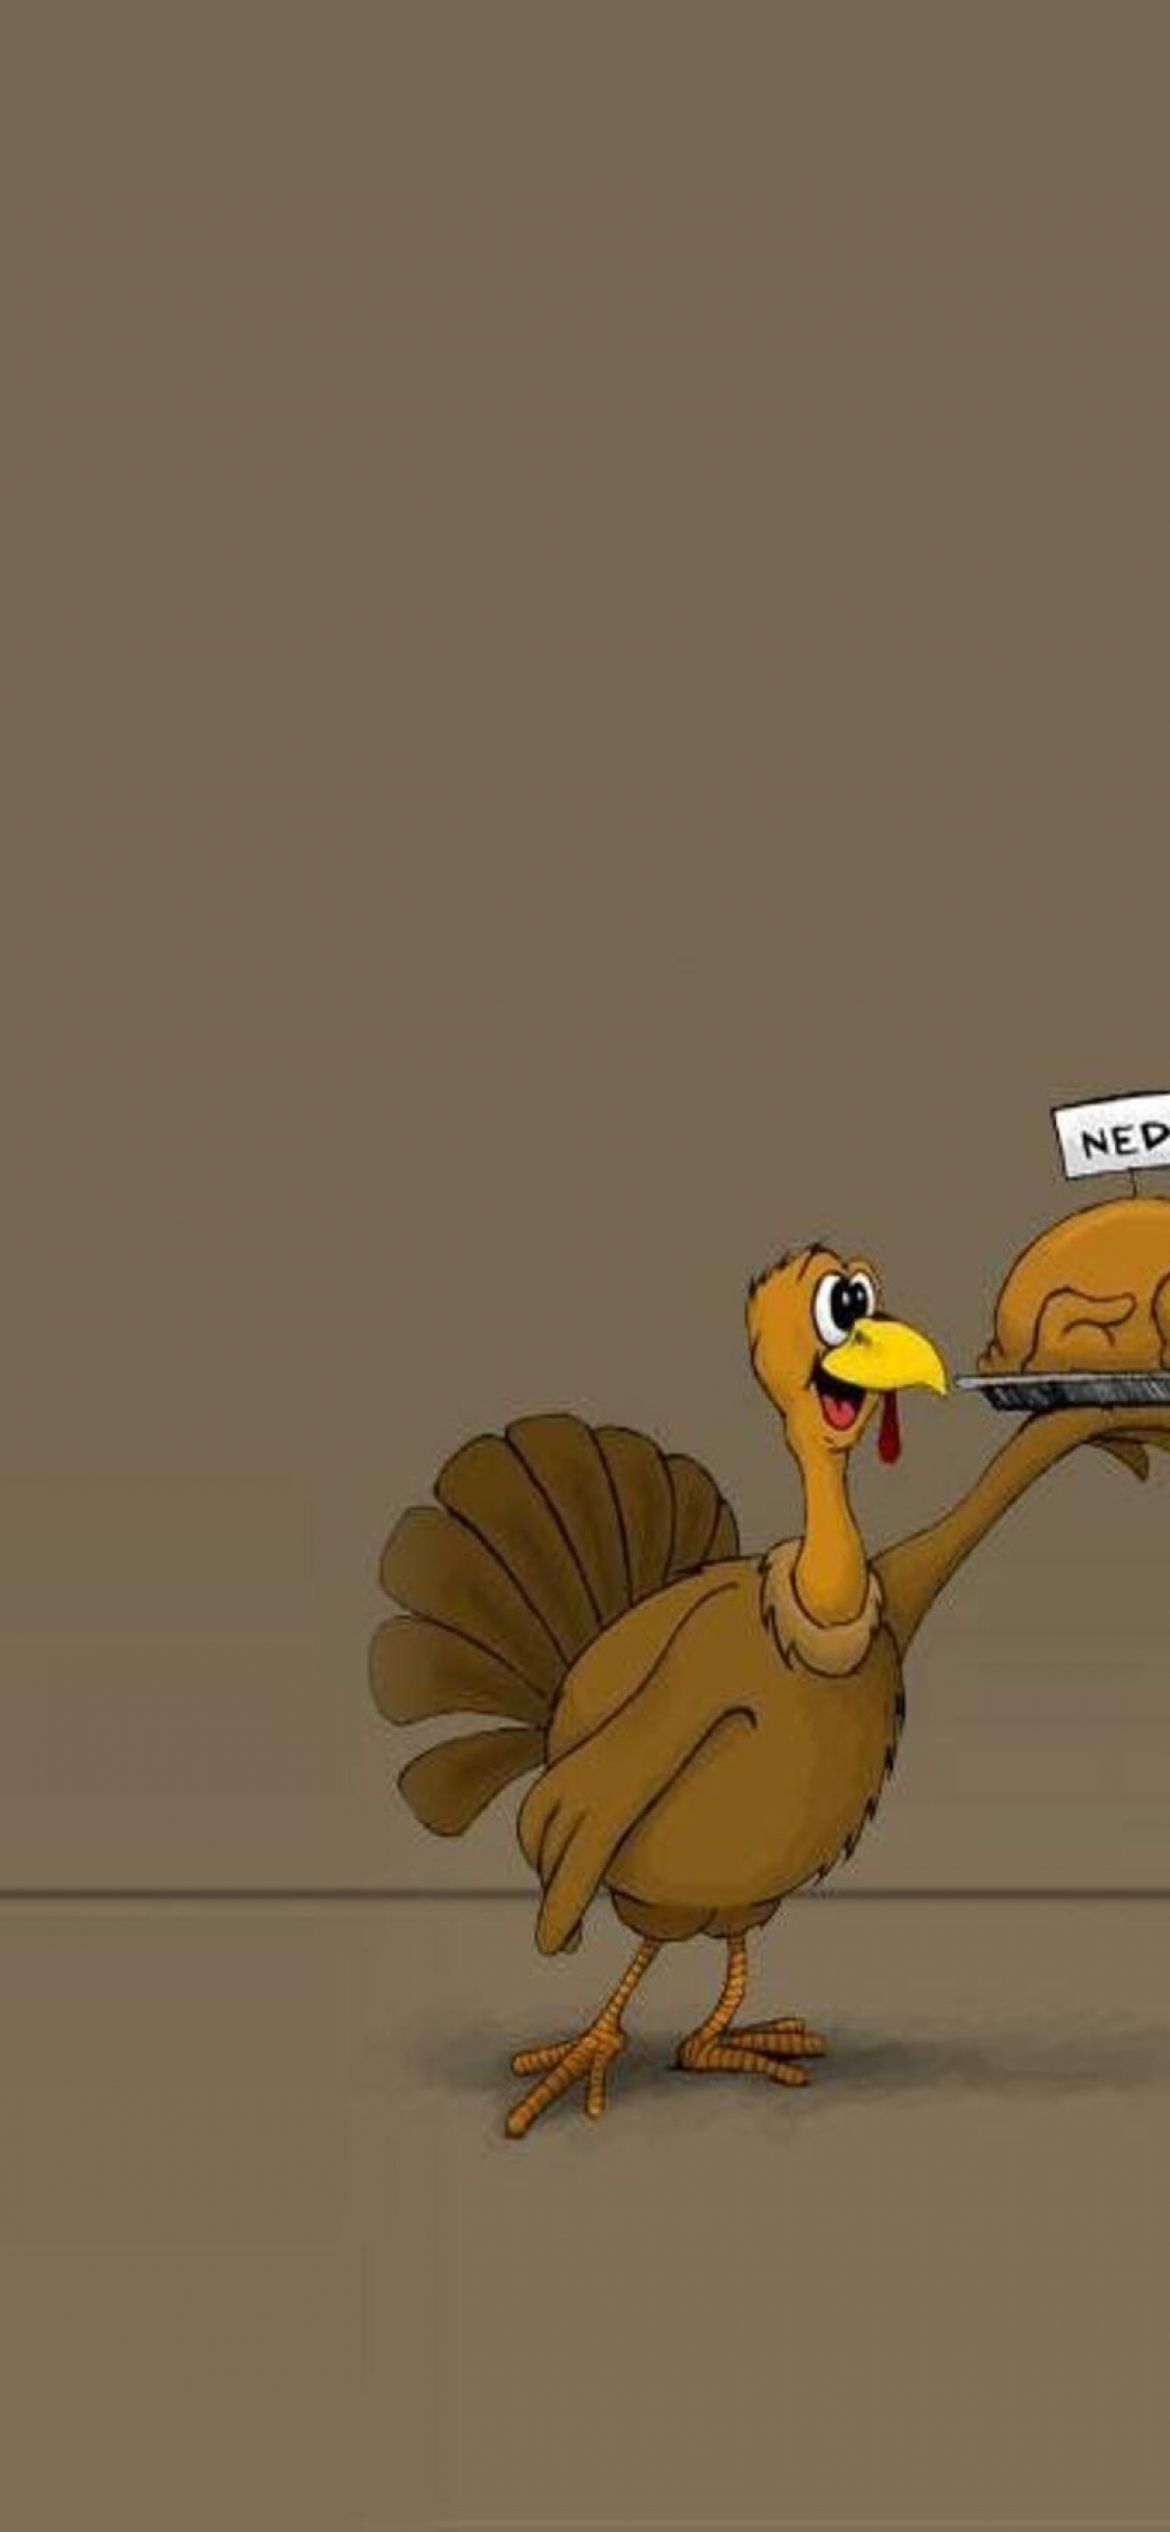 Download Funny Thanksgiving Wallpapers Wallpaper 